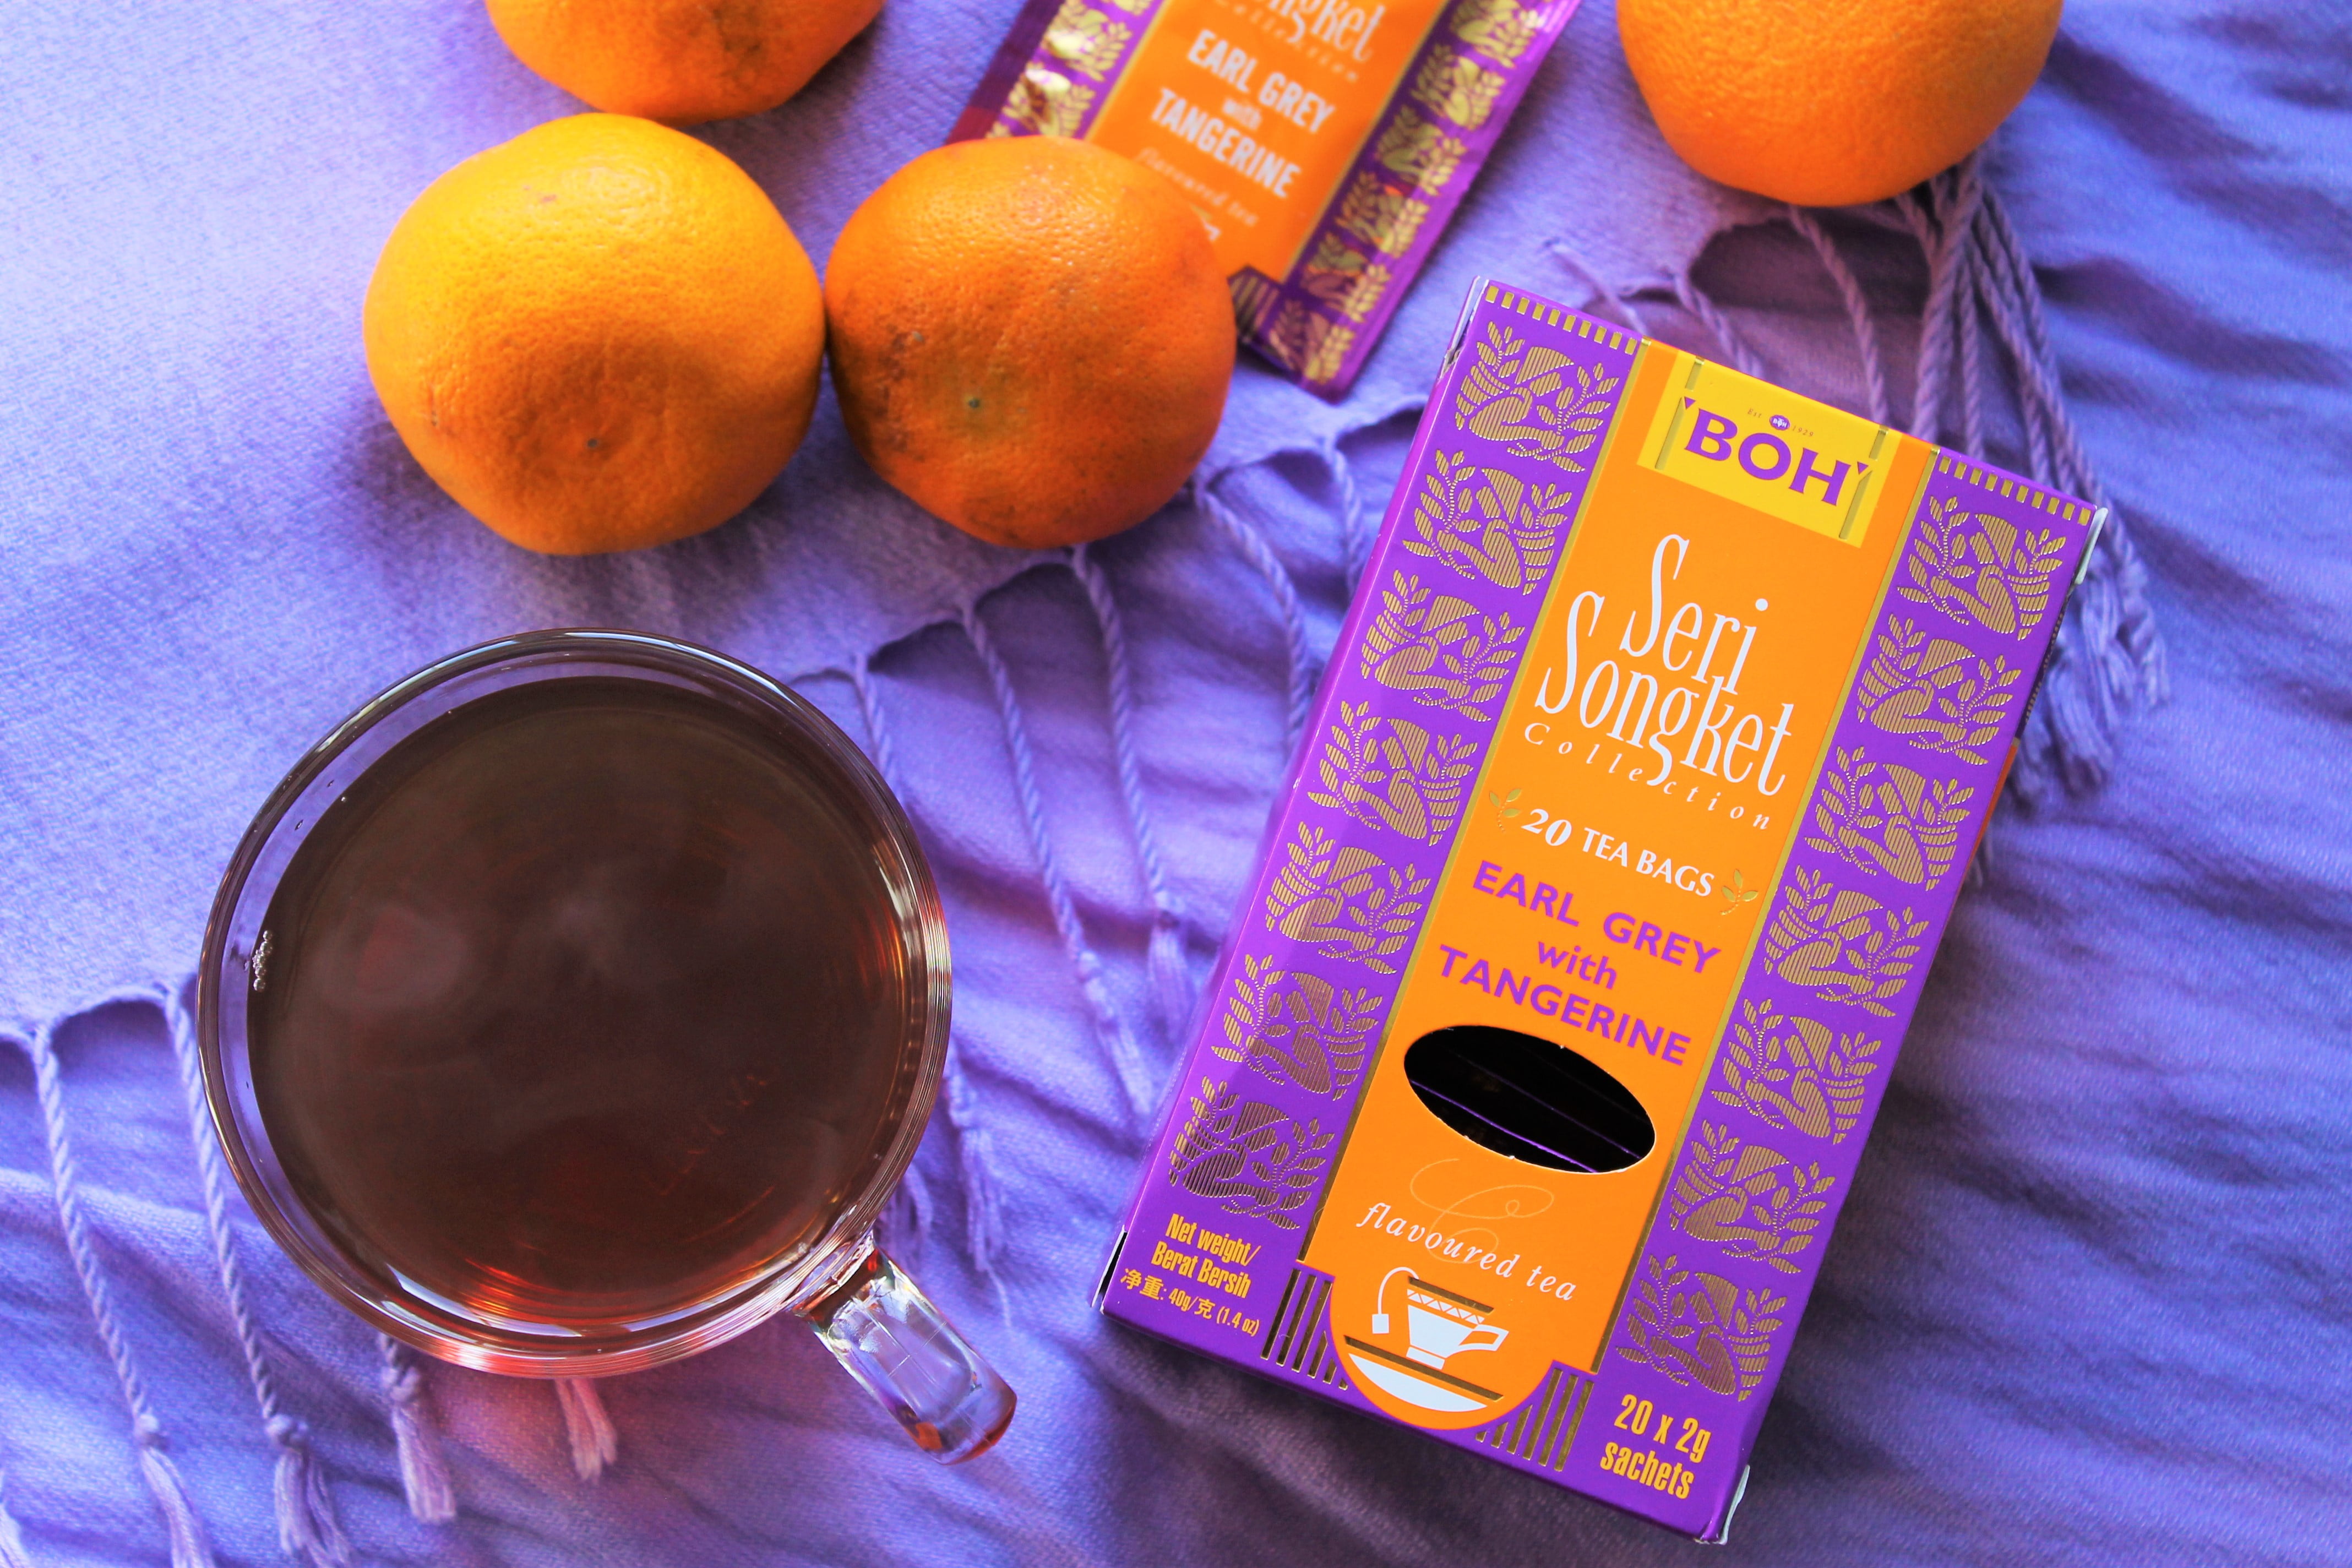 boh earl grey with tangerine tea review